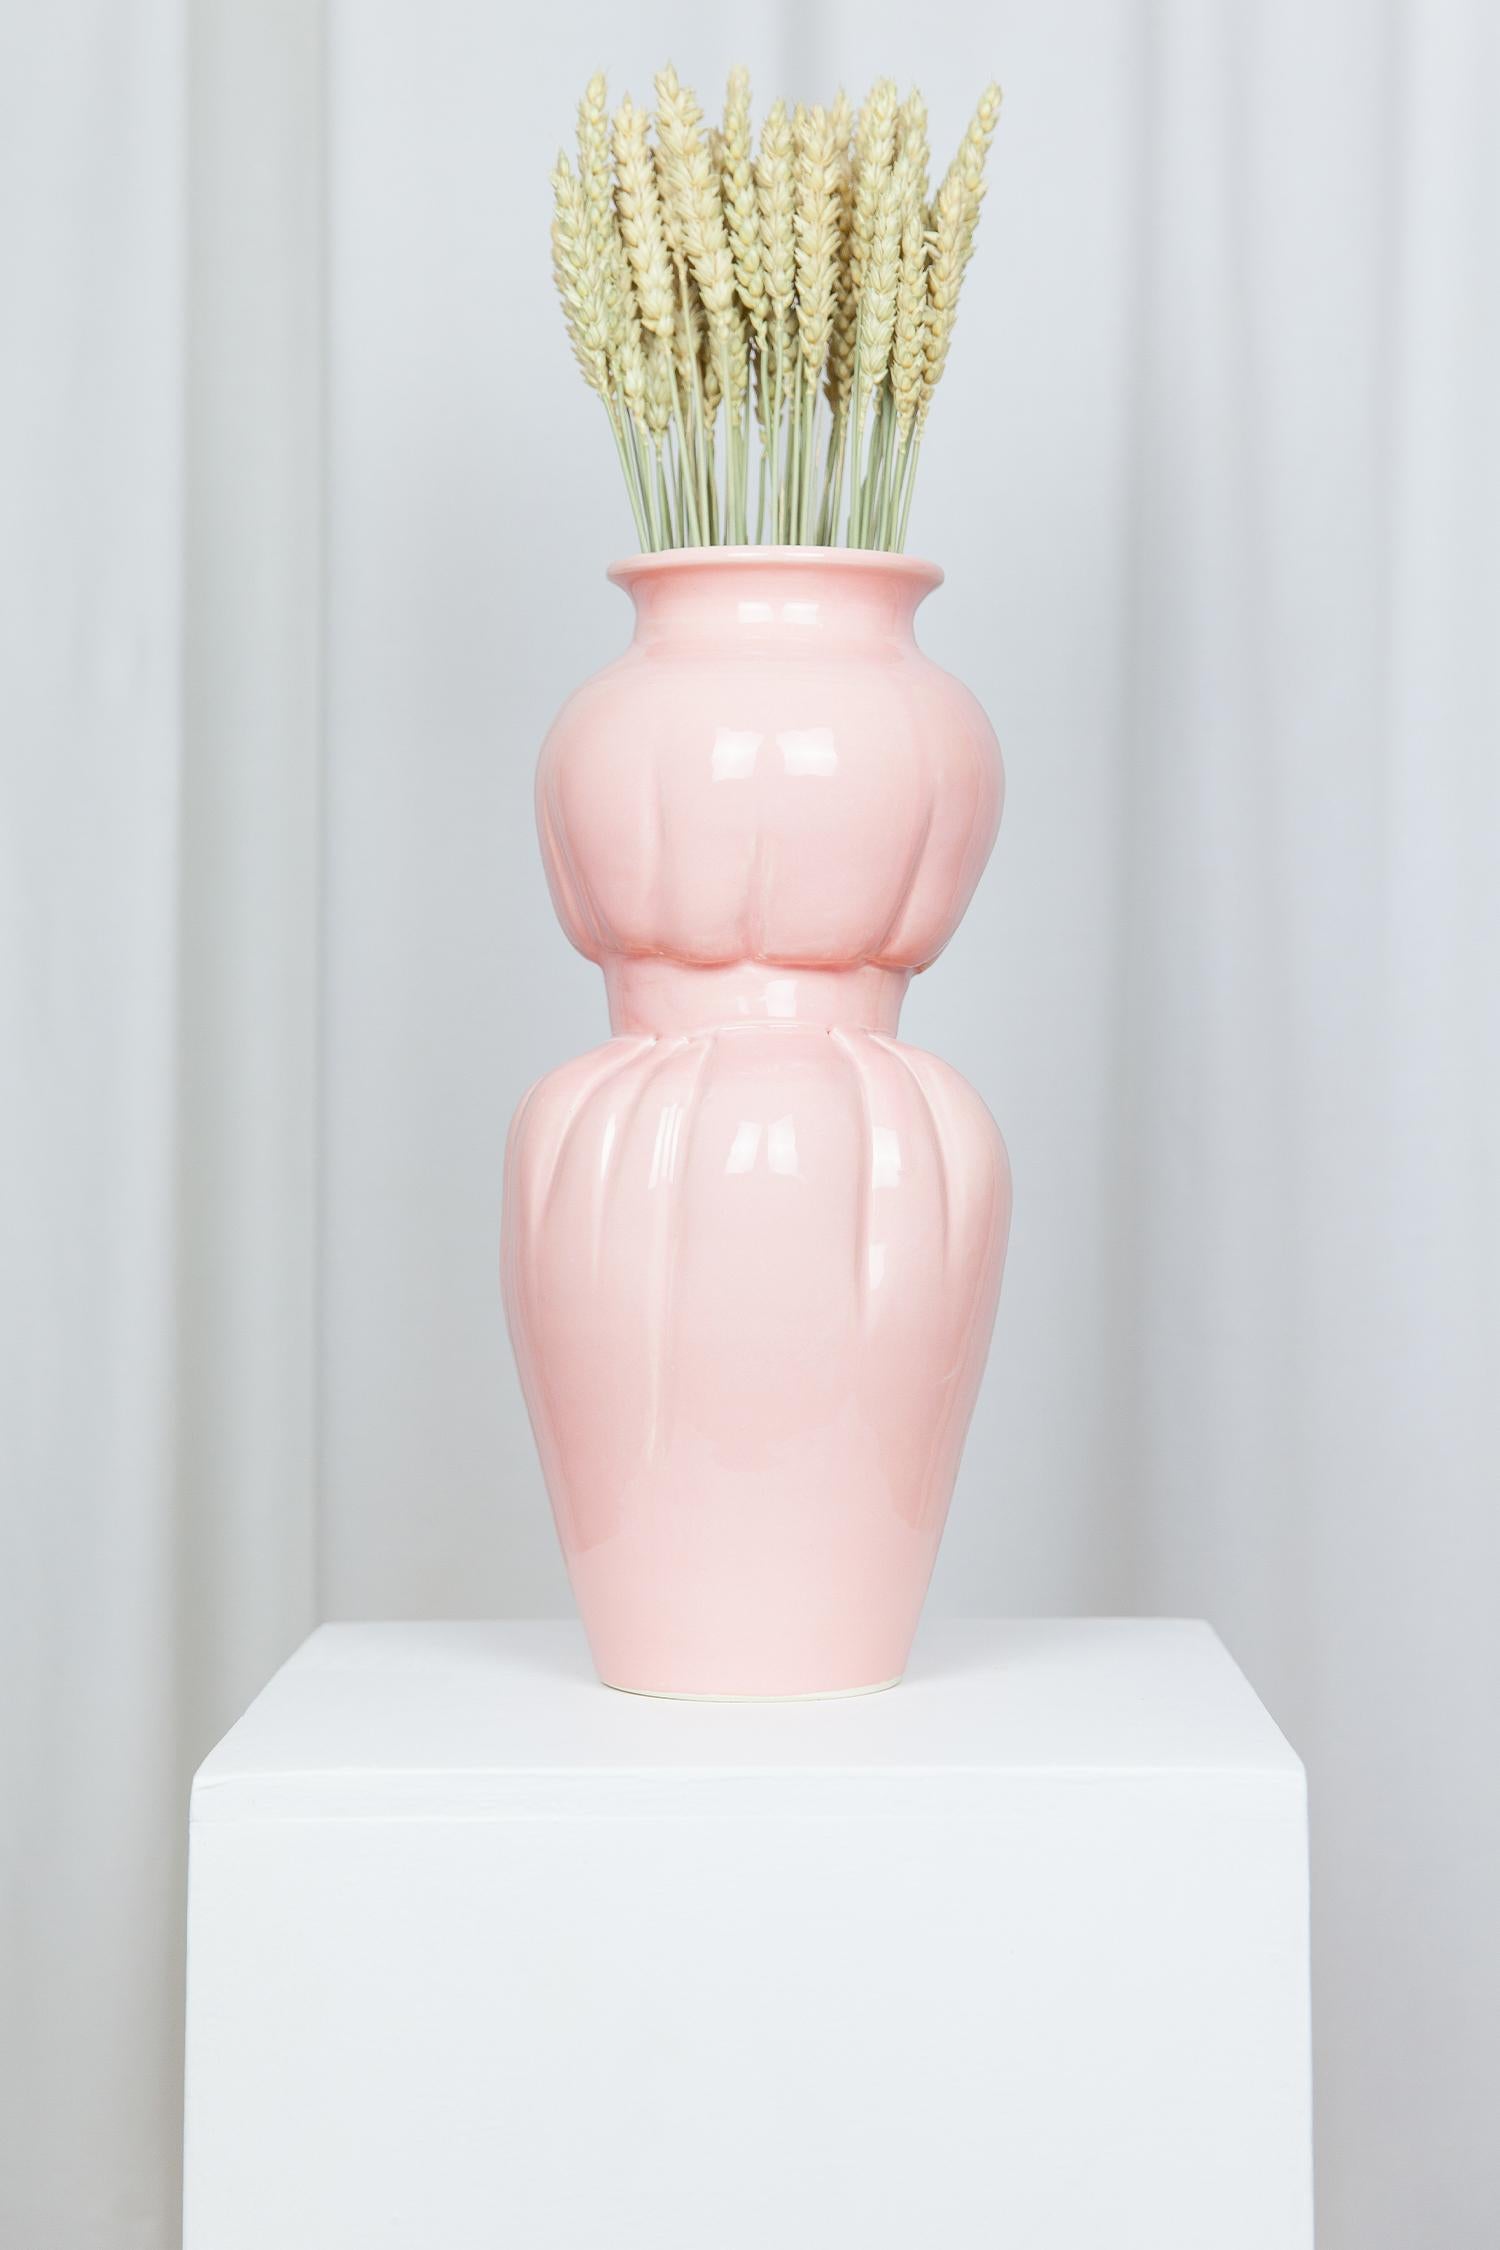 BELT VASE 
Vase in white earthenware, glazed in pink.
This piece is designed and handcrafted in the south of France.

Lola Mayeras — Designer 
In parallel with her profession as a fashion designer, Lola Mayeras developed a creative universe